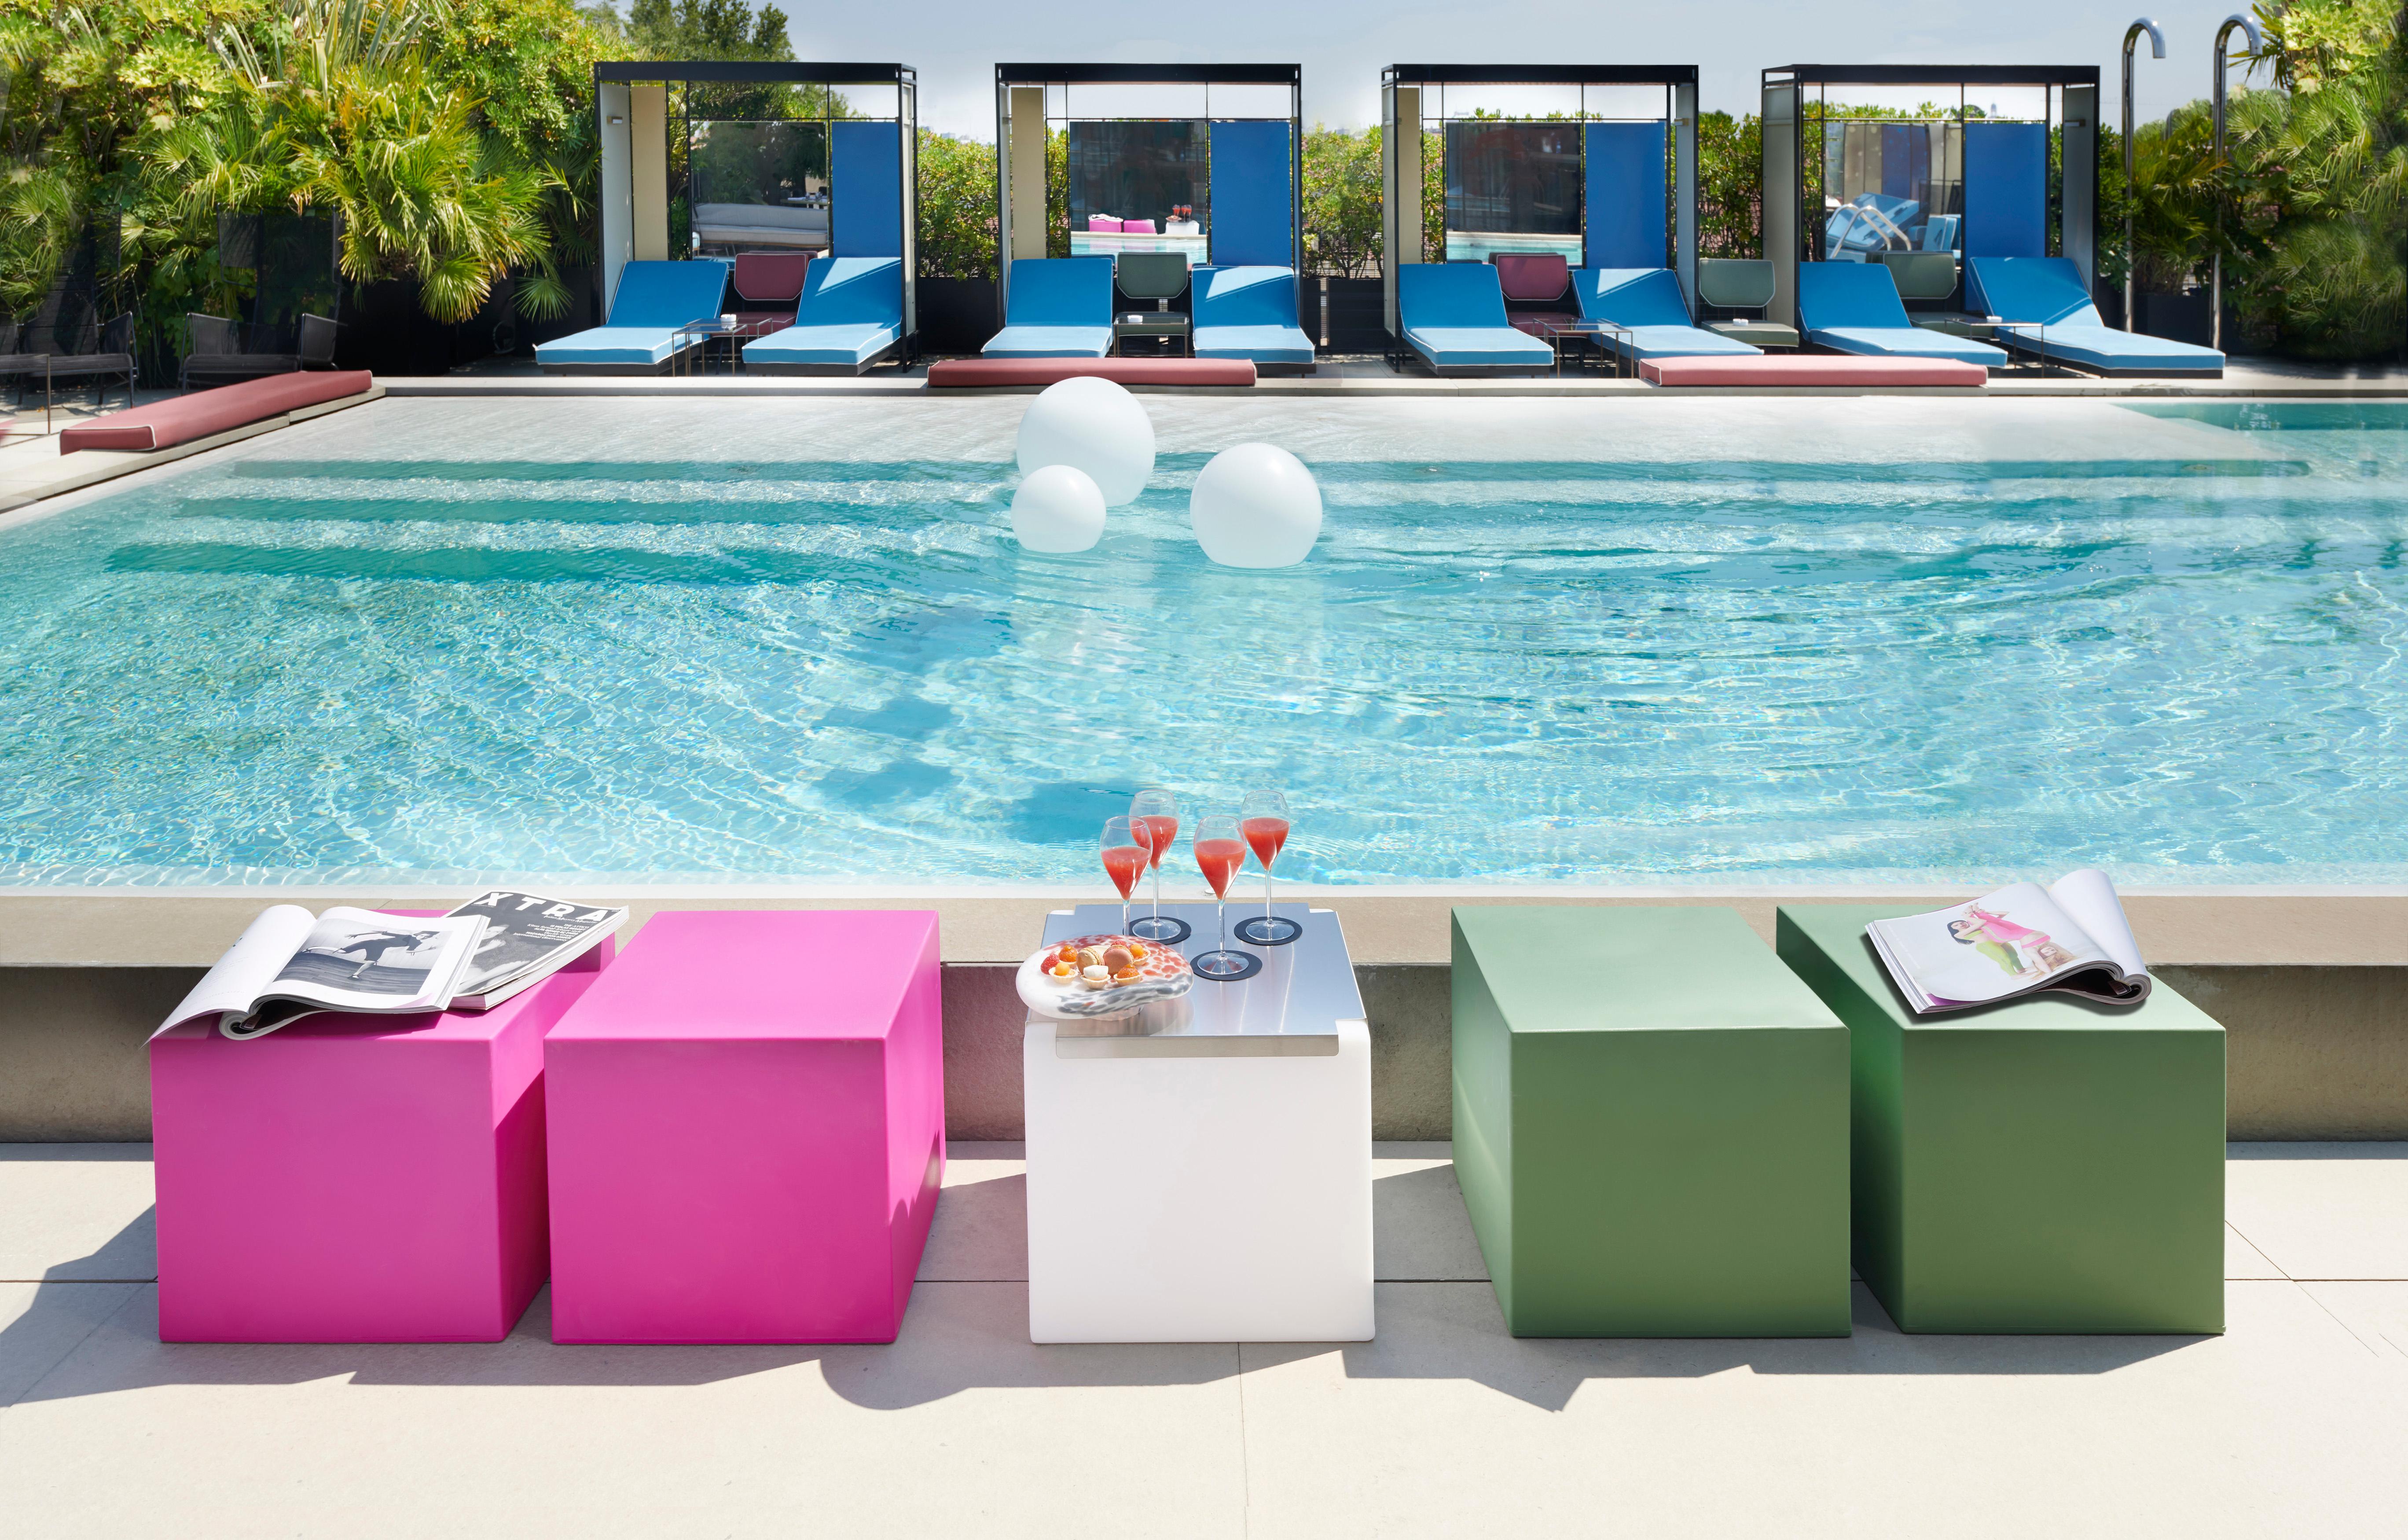 Sweet Fuchsia Cubo Pouf Stool by SLIDE Studio
Dimensions: D 43 x W 43 x H 43 cm. 
Materials: Polyethylene.
Weight: 4 kg.

Available in different color options. This product is suitable for indoor and outdoor use. Available in different versions: